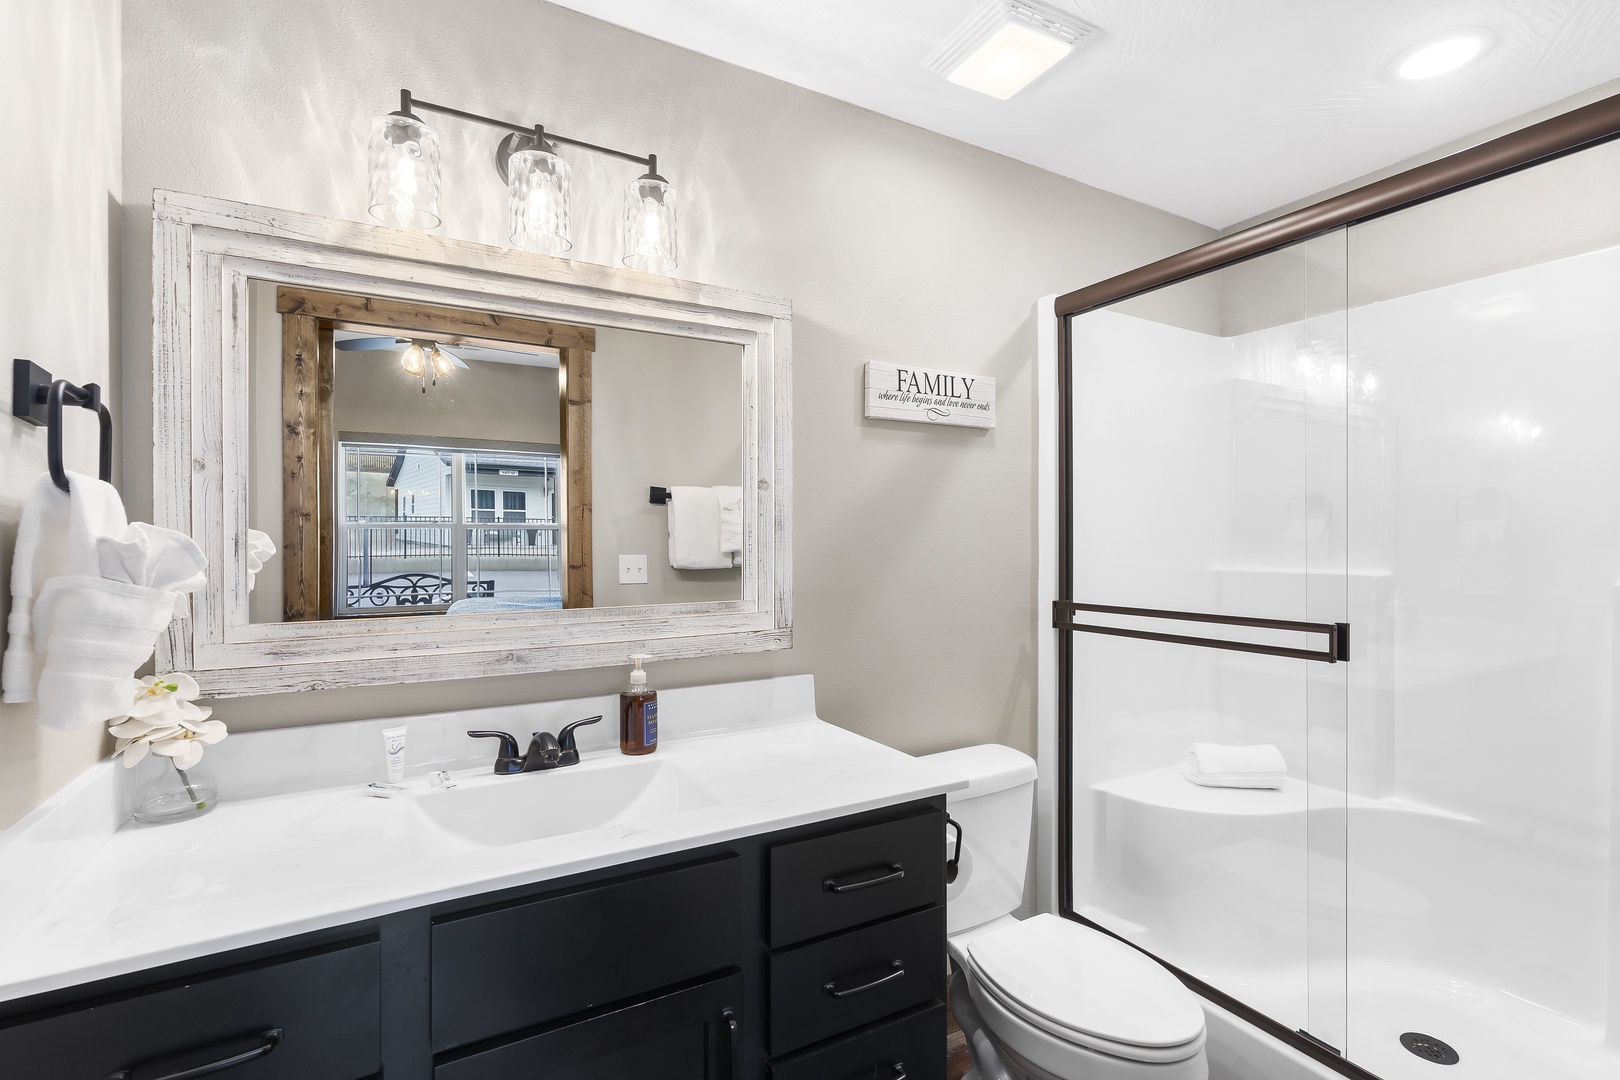 The first bedroom’s ensuite includes a single vanity & glass shower